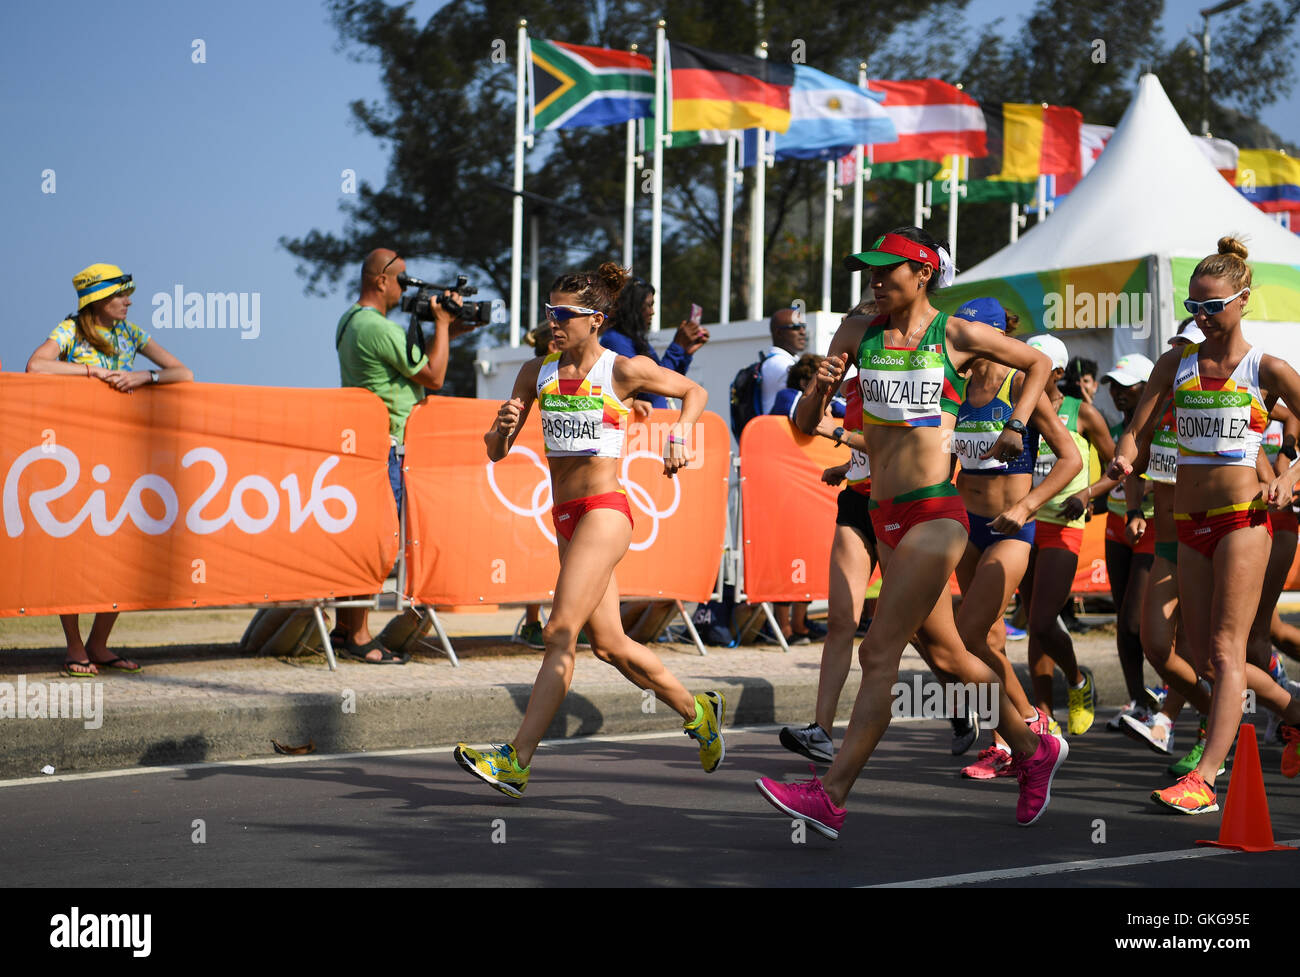 Rio de Janeiro, Brazil. 19th August, 2016. Beatriz Pascual of Spain and Maria Gonzalez of Mexico leads the pack during the womens 20km race walk on Day 14 of the 2016 Rio Olympics at Pontal on August 19, 2016 in Rio de Janeiro, Brazil. (Photo by Roger Sedres/Gallo Images) Credit:  Roger Sedres/Alamy Live News Stock Photo